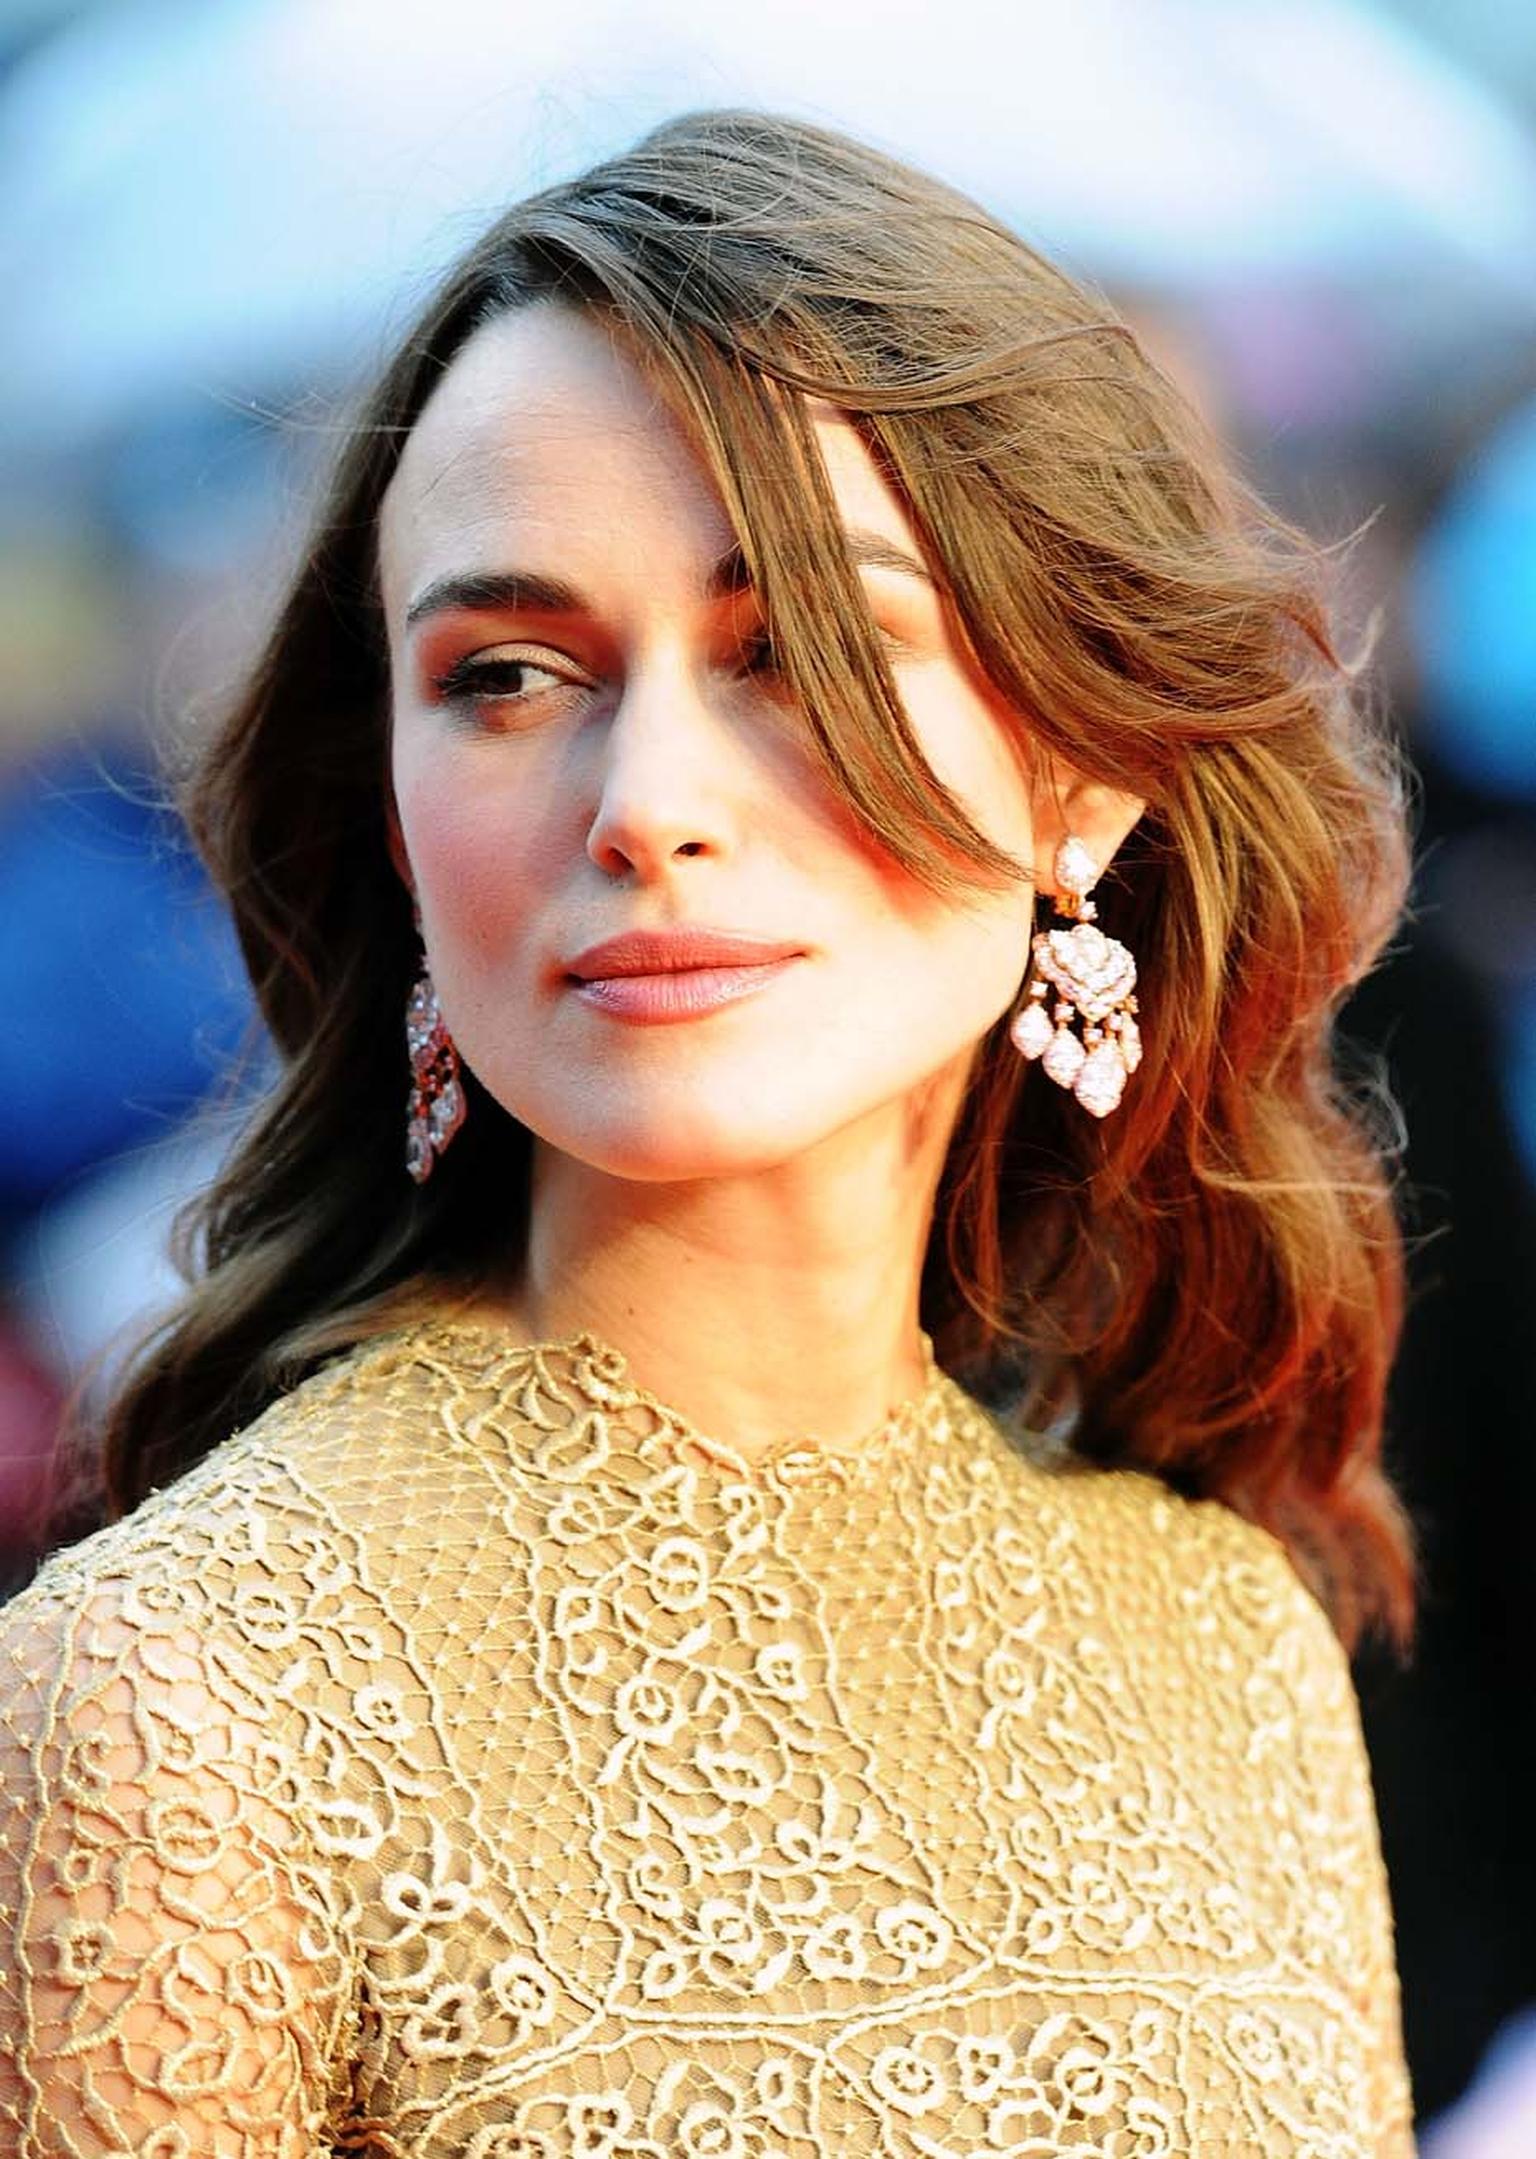 Actress Keira Knightley looked every inch the English rose in a pair of stunning David Morris diamond earrings at the premiere of her new film The Imitation Game in London.